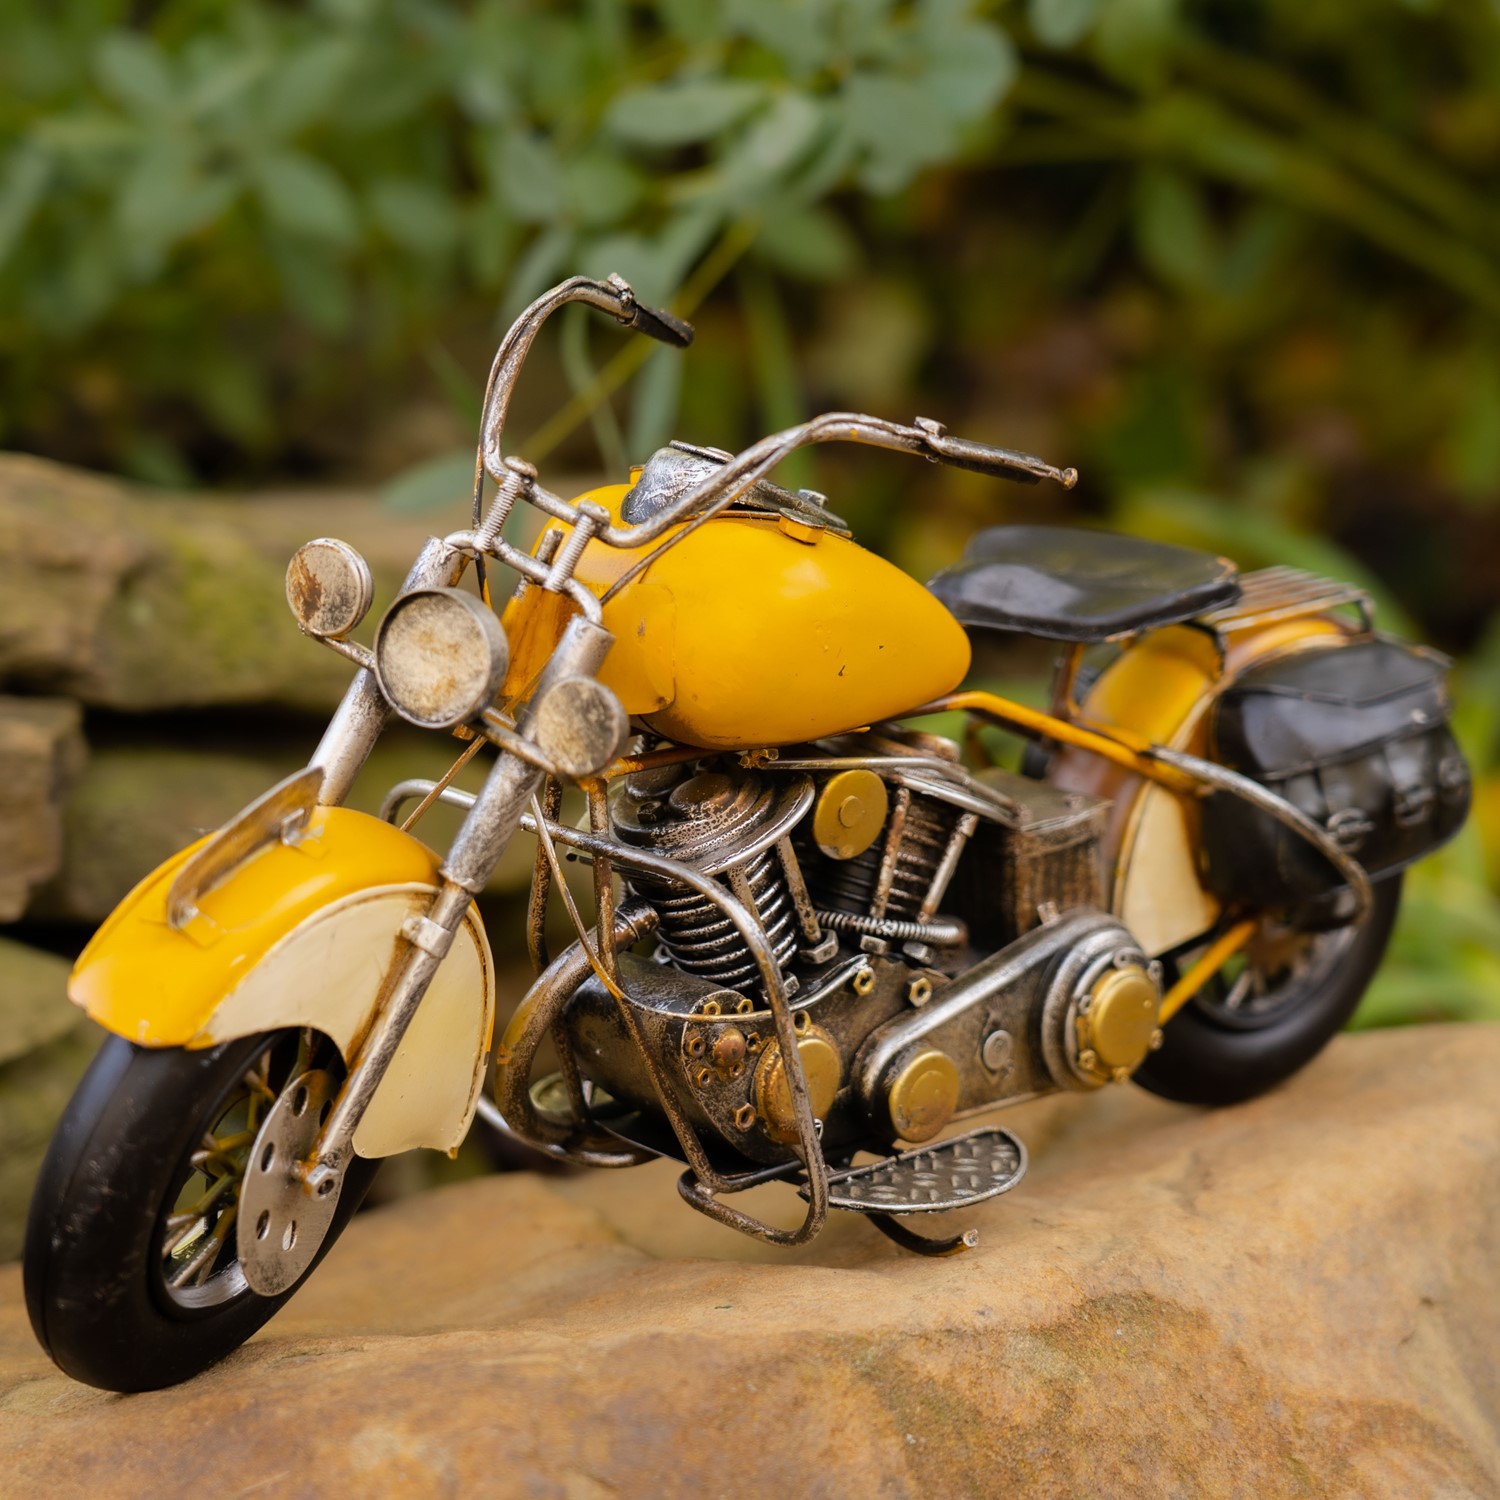 SET/6 ASSORTED VINTAGE STYLE MODEL MOTORCYCLES